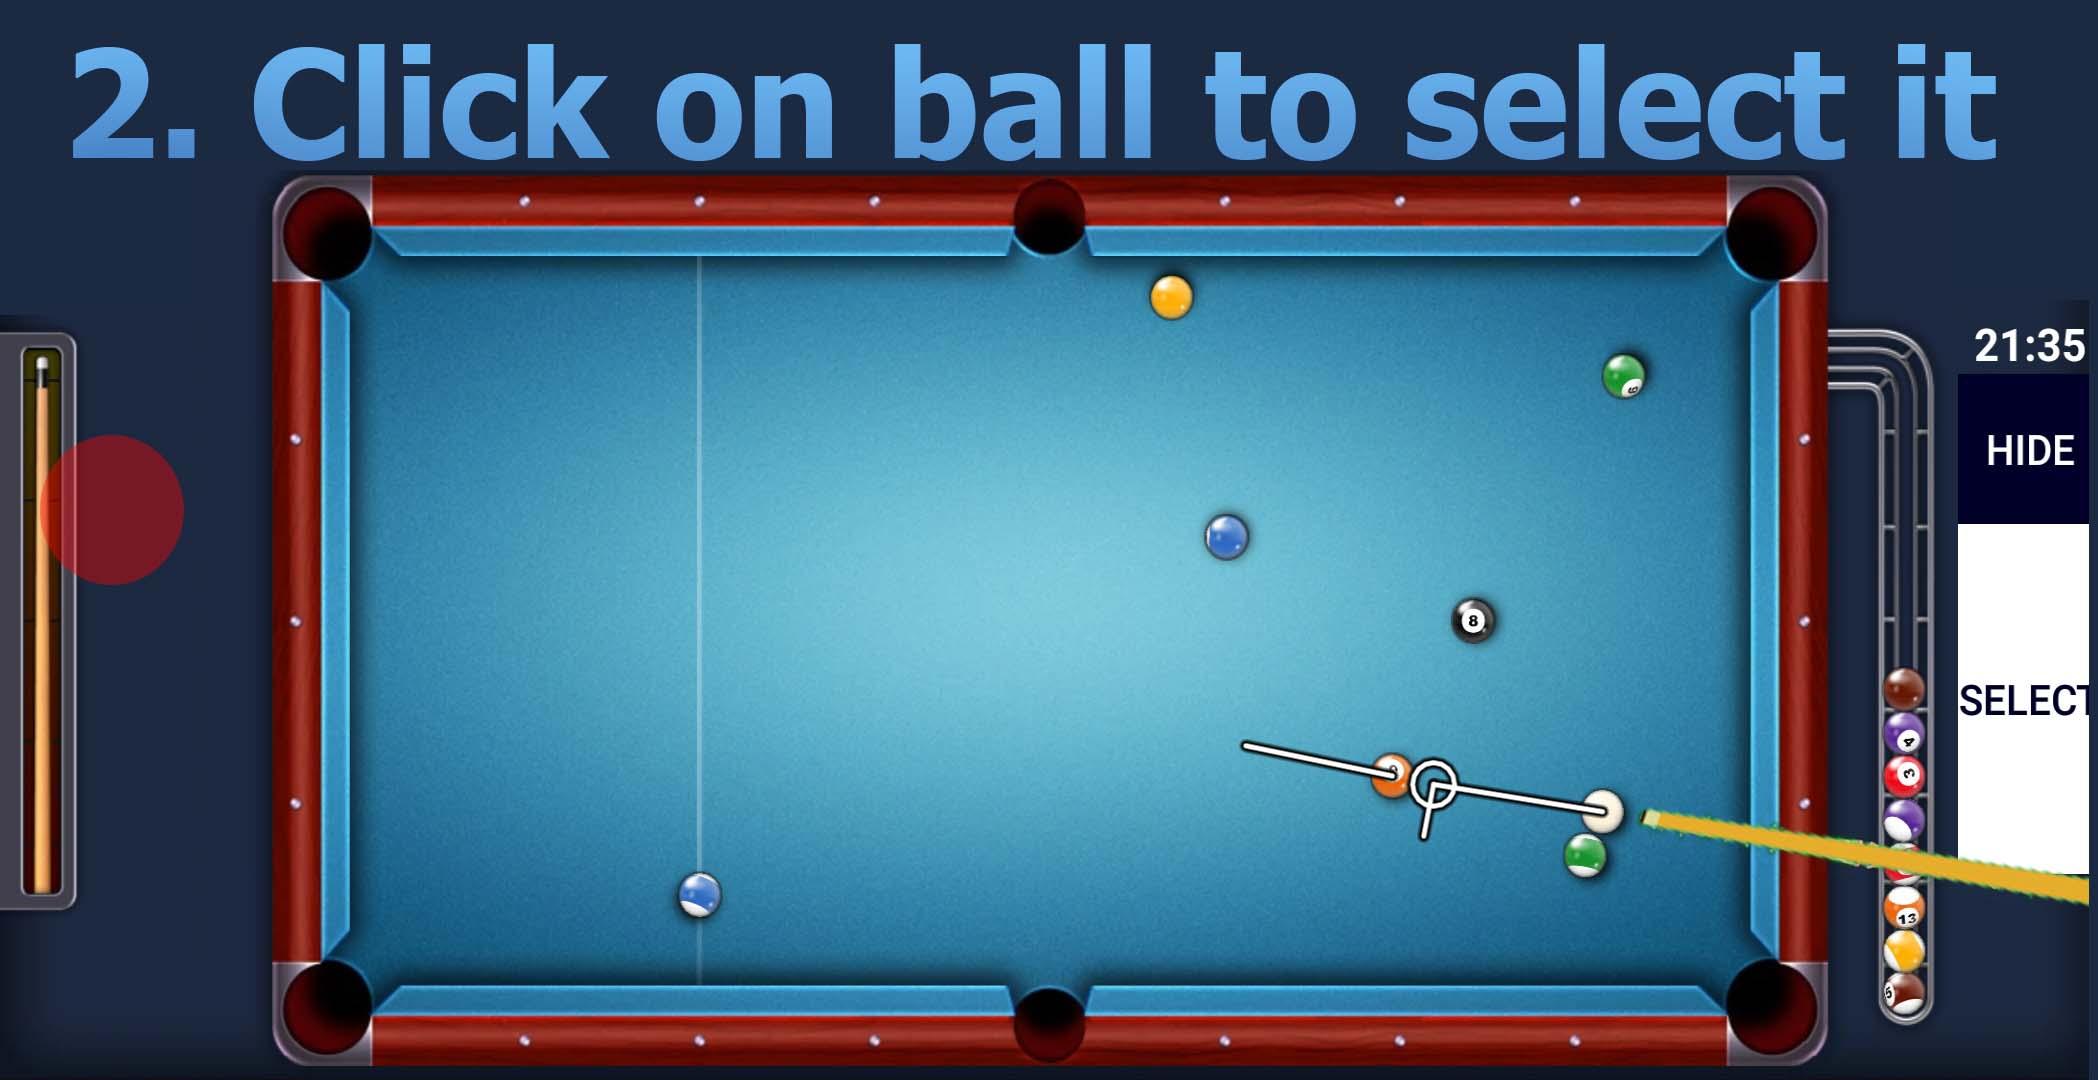 8 Ball Pool Trainer for Android - APK Download - 